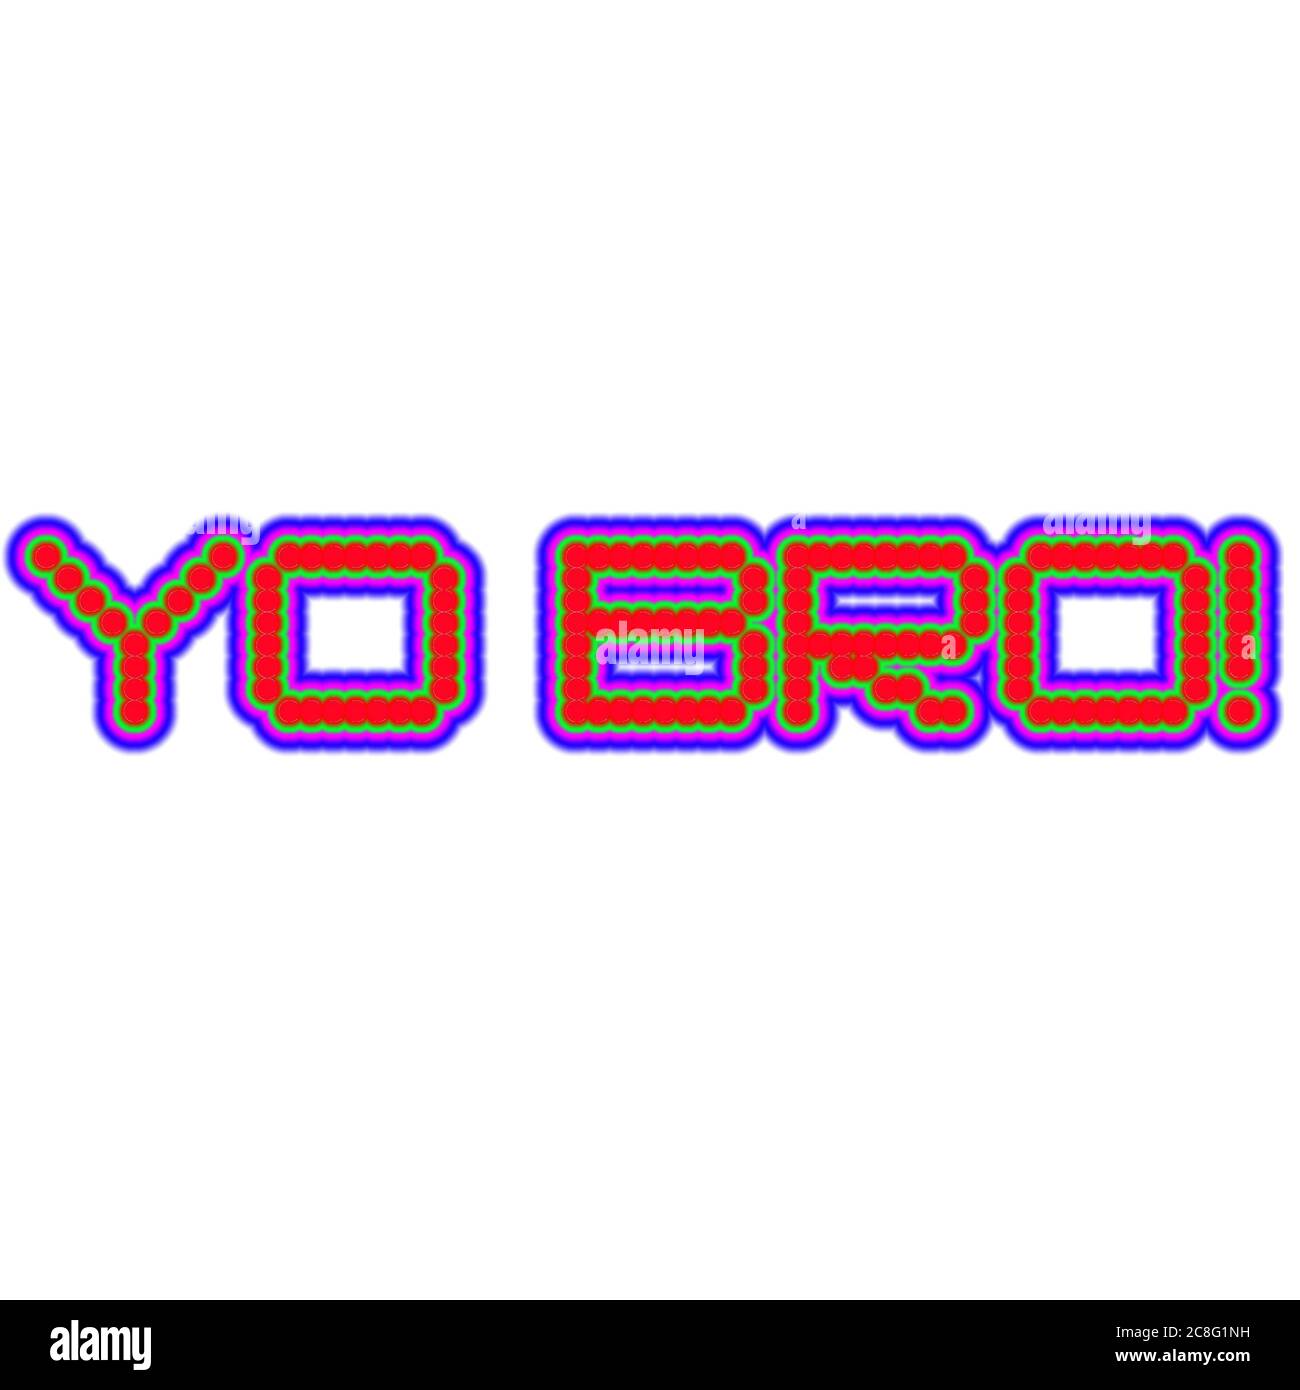 Yo bro words sign. Exclamation point. Red blue text on white background. Old school concept. Baloon spray paint illustration Stock Photo